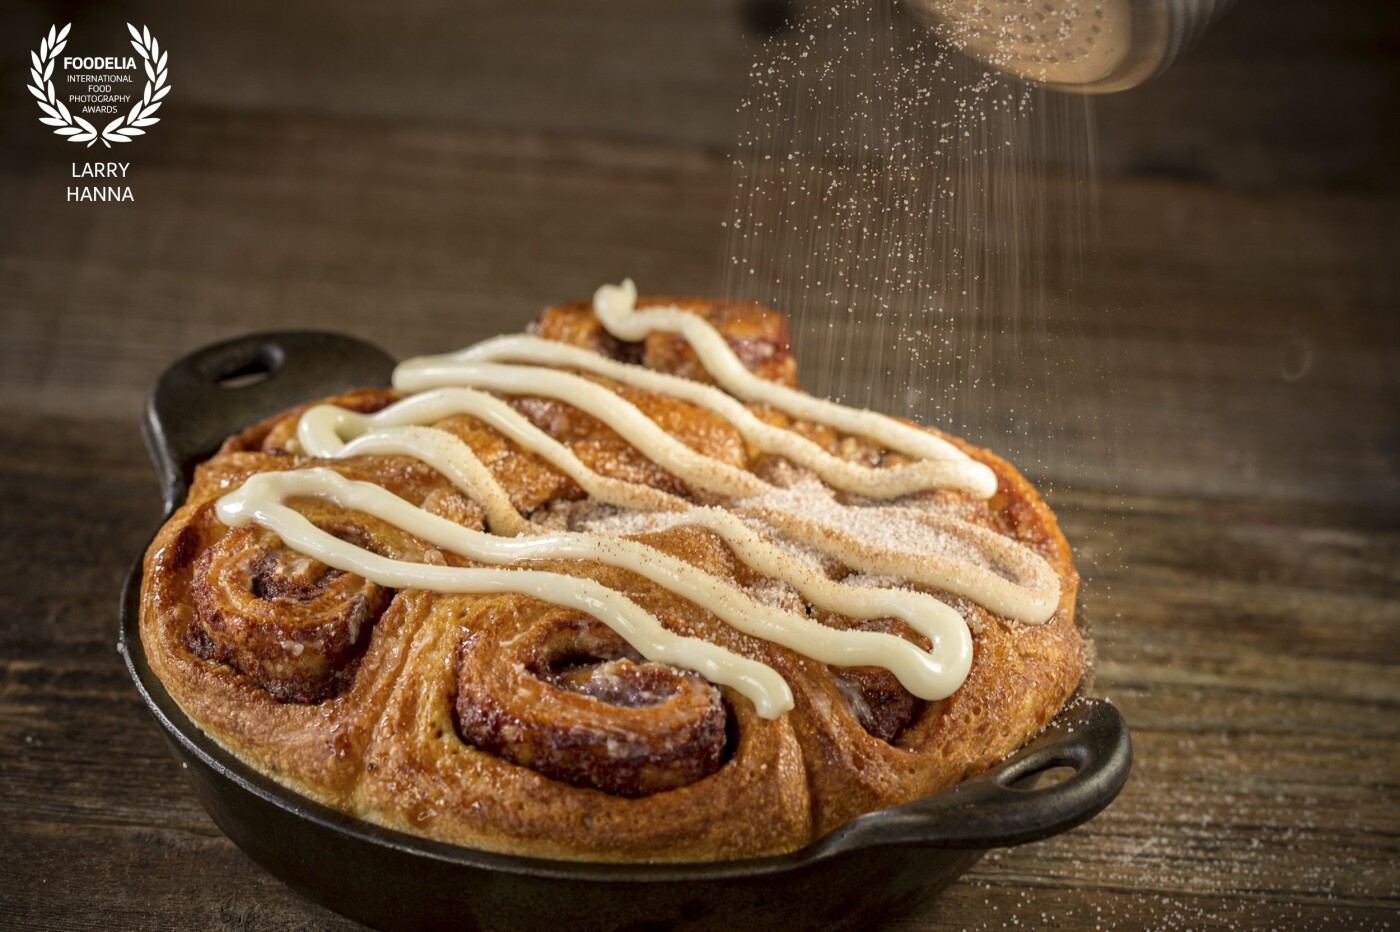 Cinnamon rolls photographed on location for Joe's American Bar and Grill in Boston Mass.  Food Stylist Amy Villareale style the image for me.